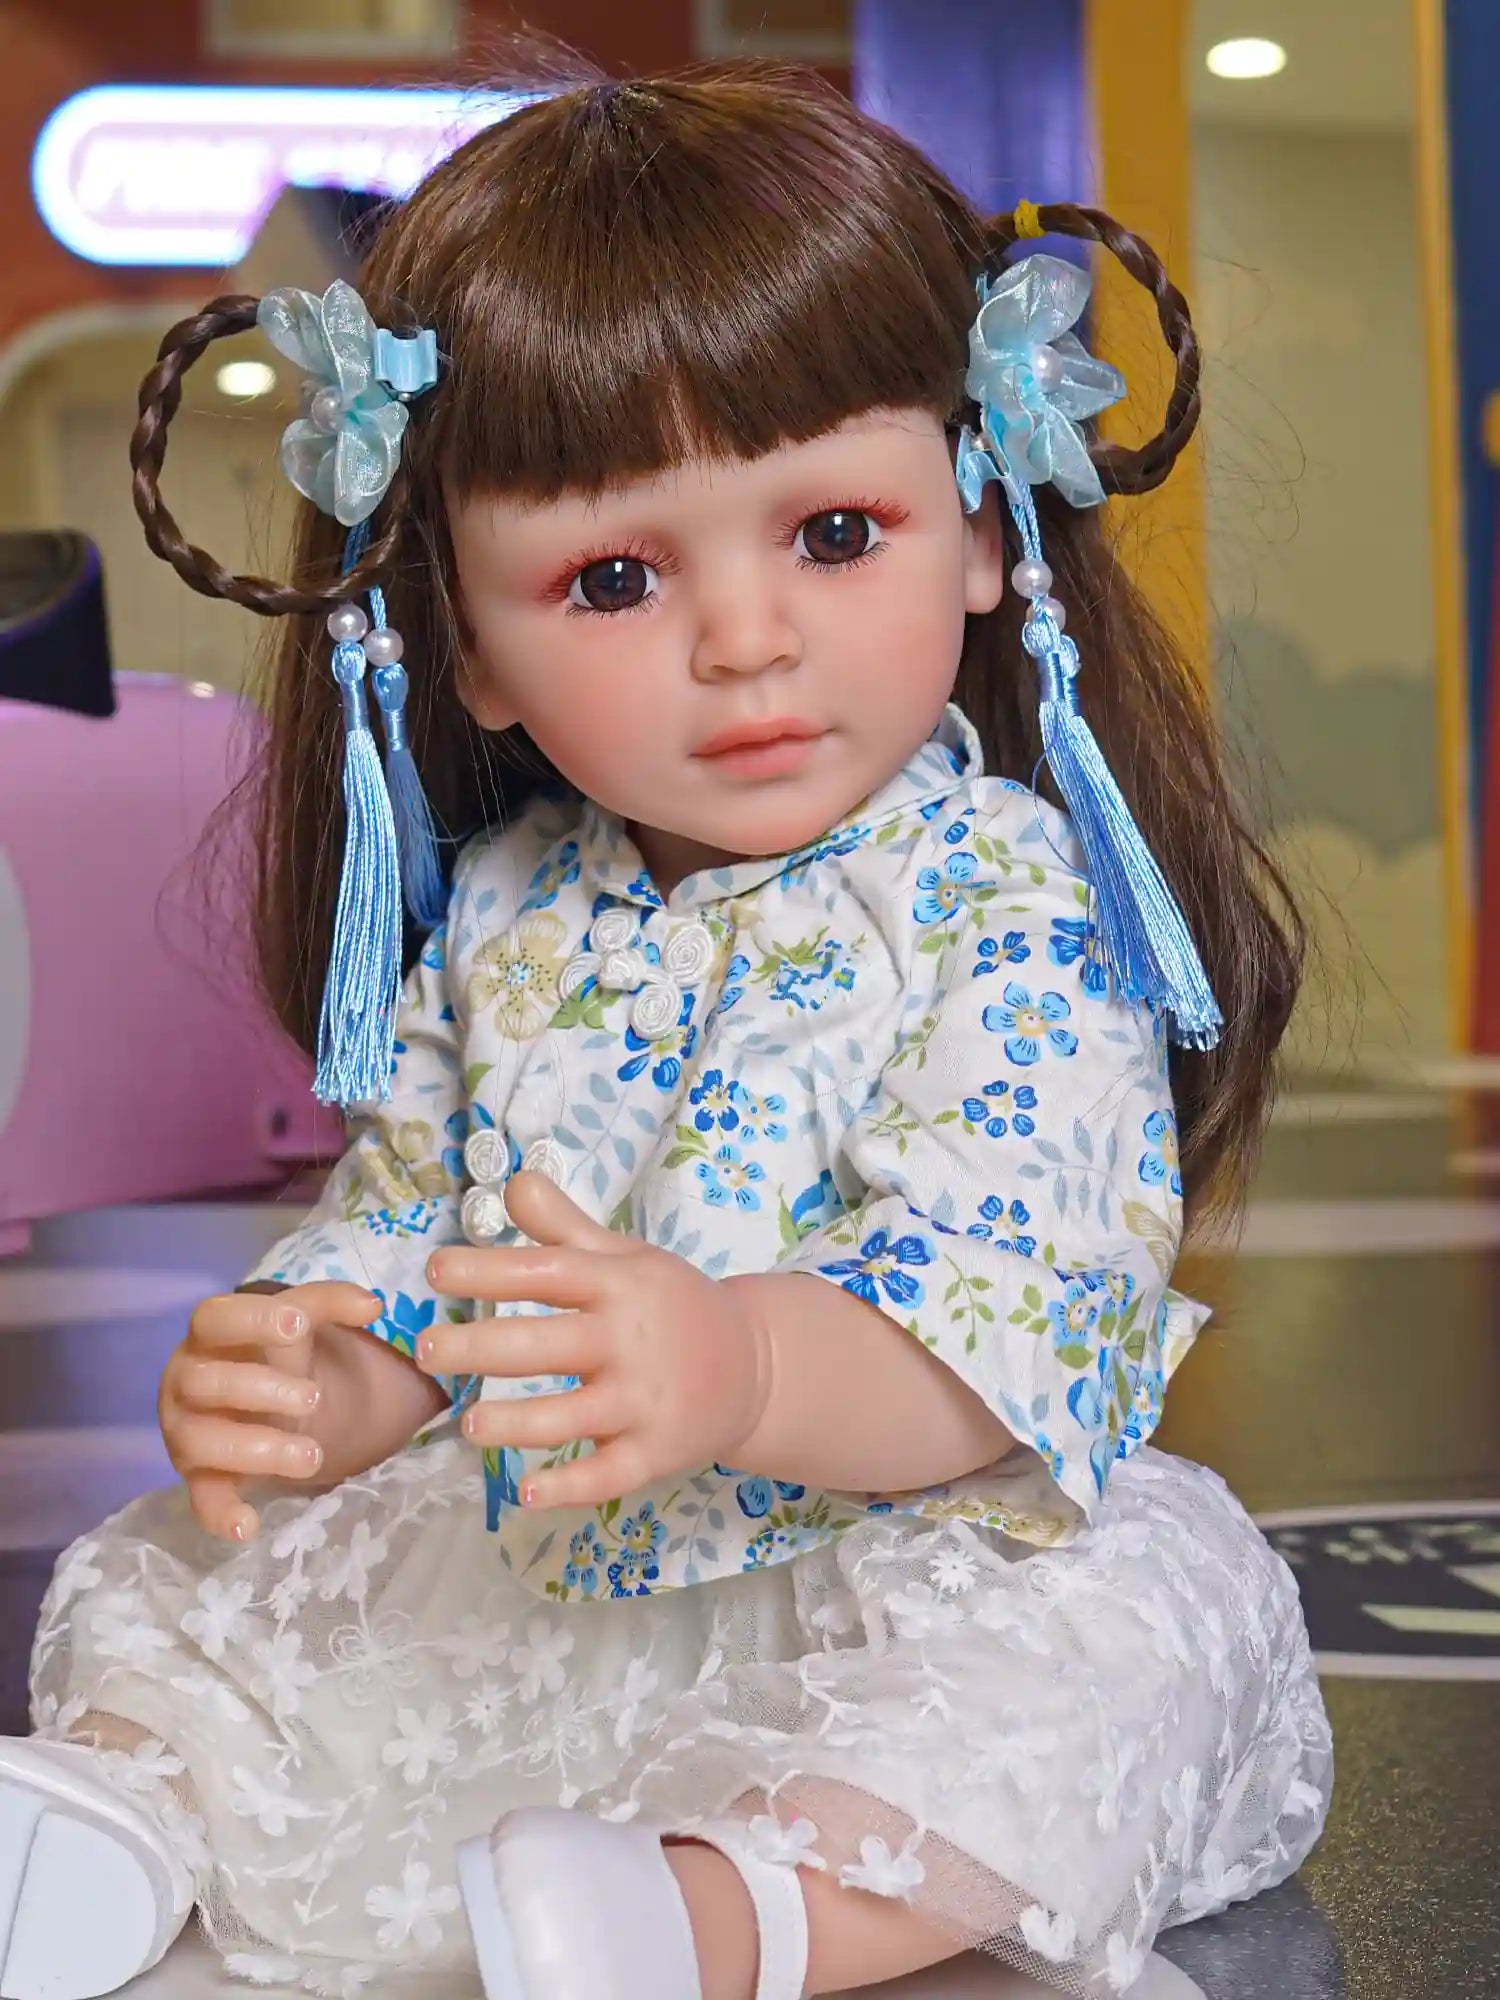 Toddler doll seated with hands clasped, wearing a blue floral dress and white shoes, with blue hair ribbons, in a playful indoor setting.